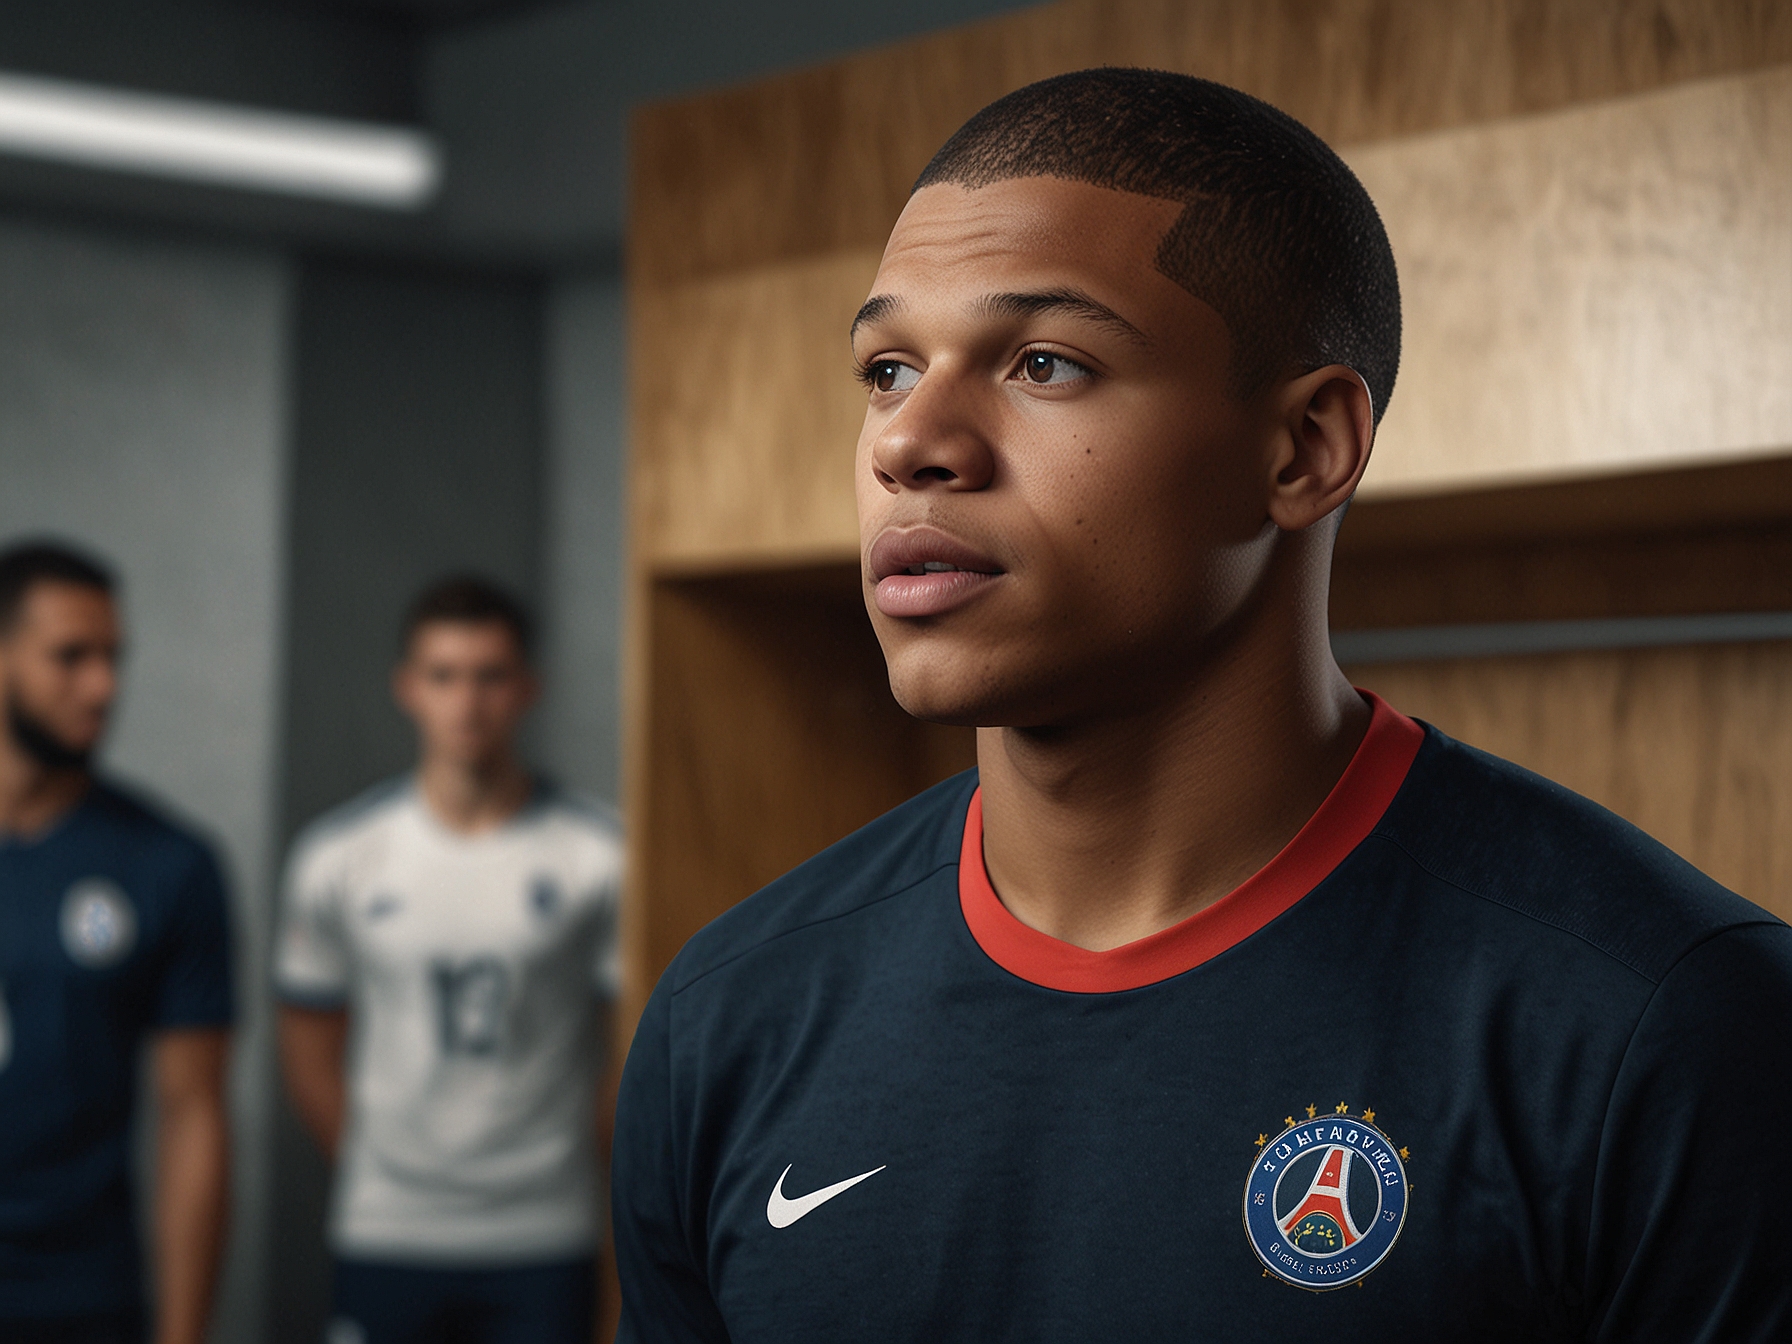 An animated Kylian Mbappe delivering an inspiring team talk in the locker room before an important Euro 2024 match, inspiring his teammates to strive for European glory.